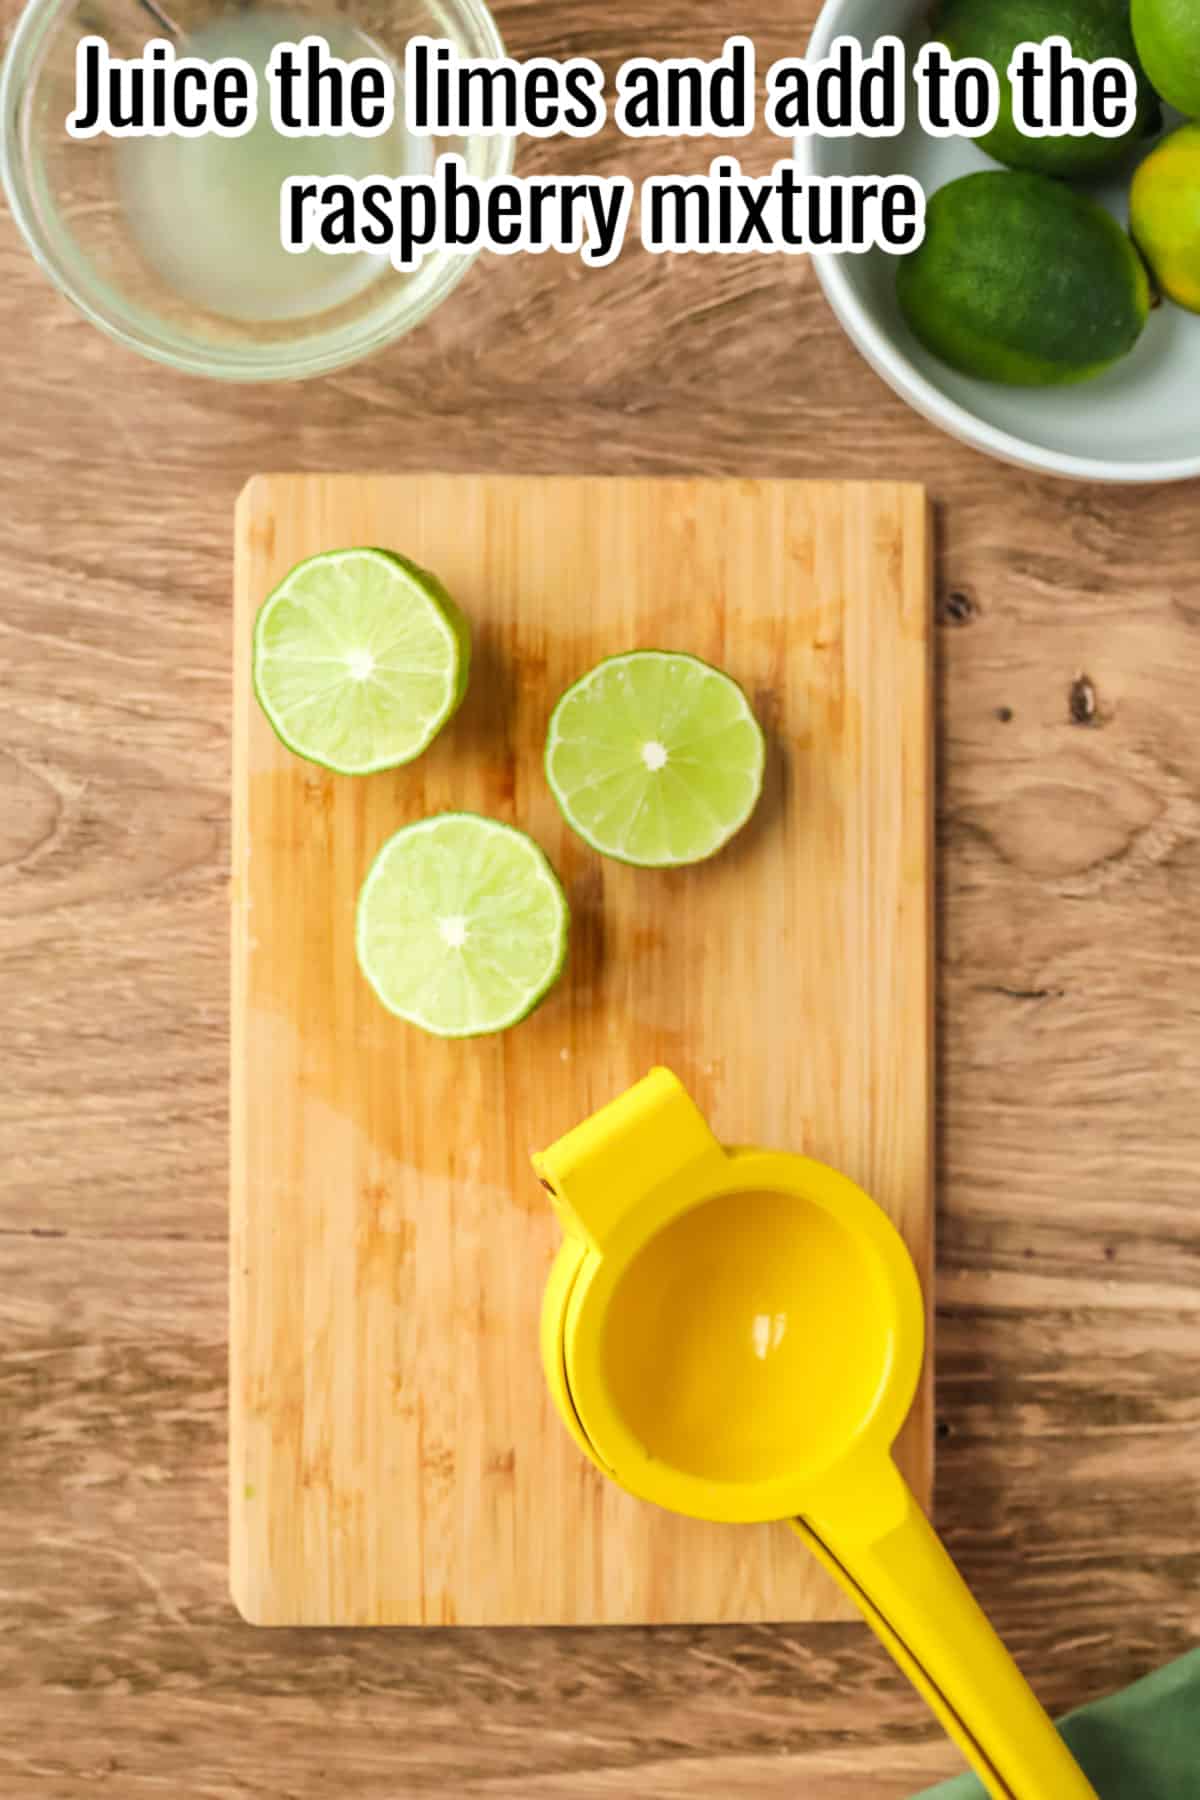 sliced limes on a wooden cutting board with a juicer.